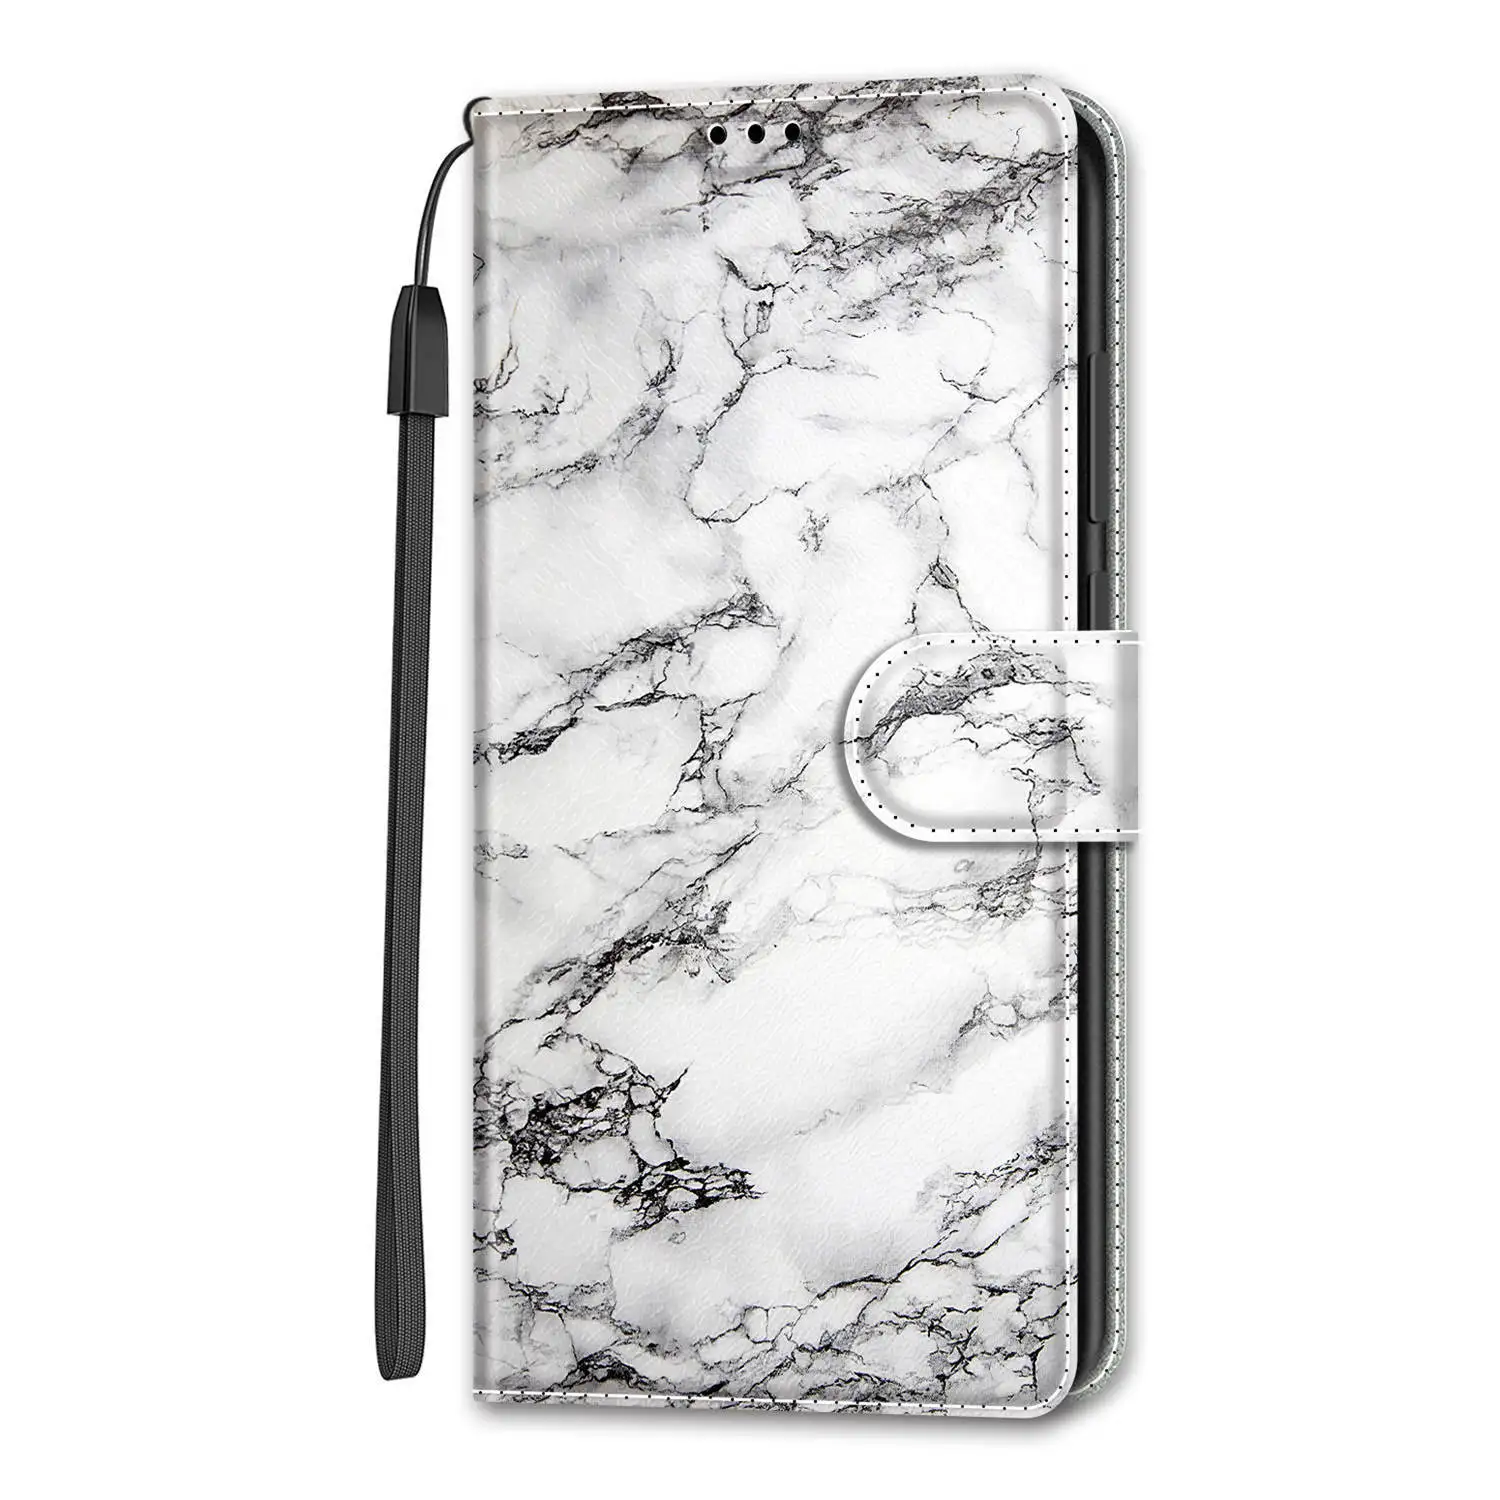 Etui Flip Leather Phone Case For Xiaomi Redmi 8 9 9A 9C 9T 10 Note 8 8T 9 Pro 9S 9T Note9 Wallet Card Holder Stand Book Cover mobile pouch